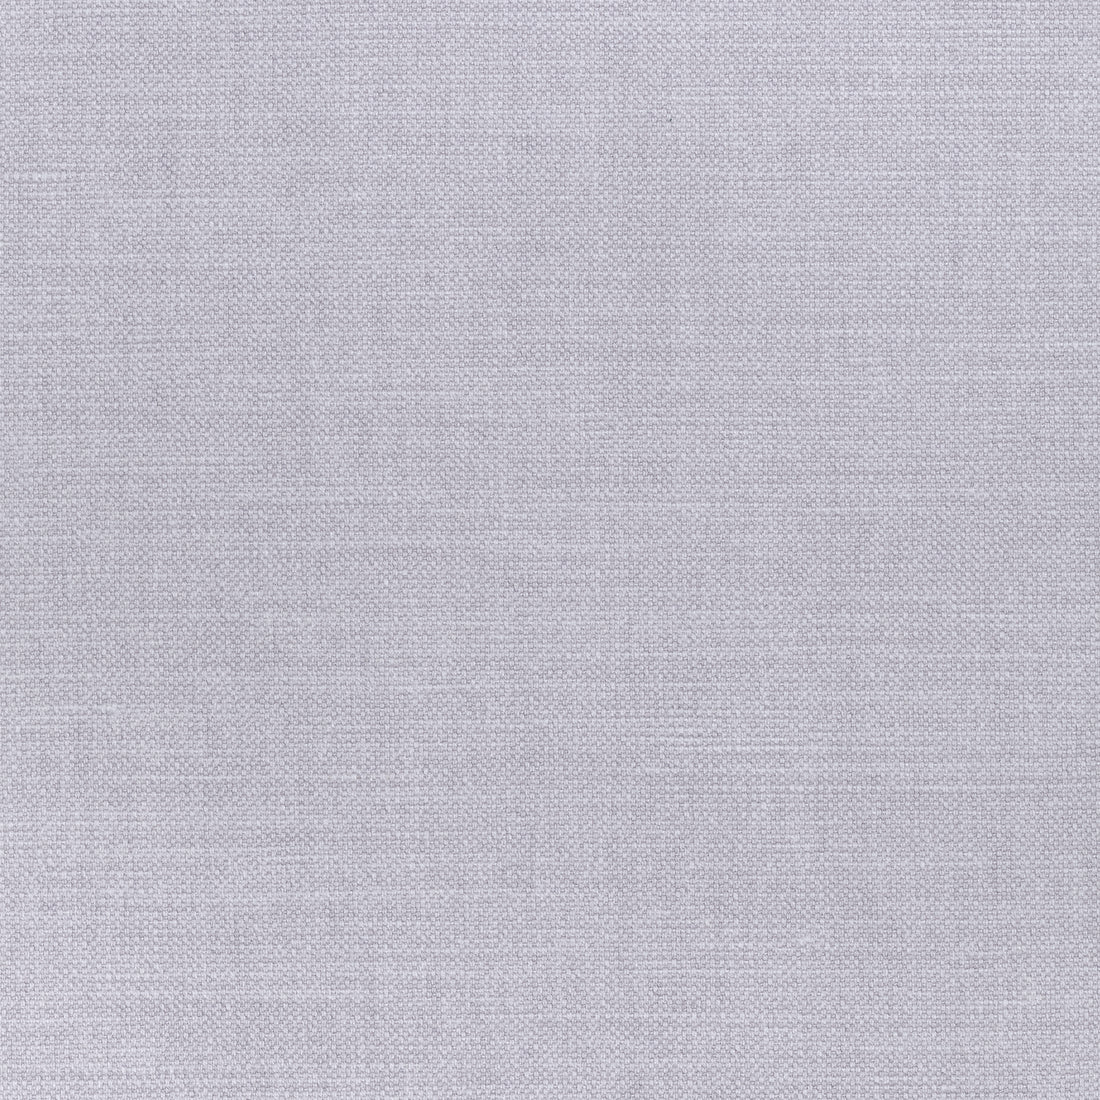 Prisma fabric in lilac color - pattern number W70135 - by Thibaut in the Woven Resource Vol 12 Prisma Fabrics collection